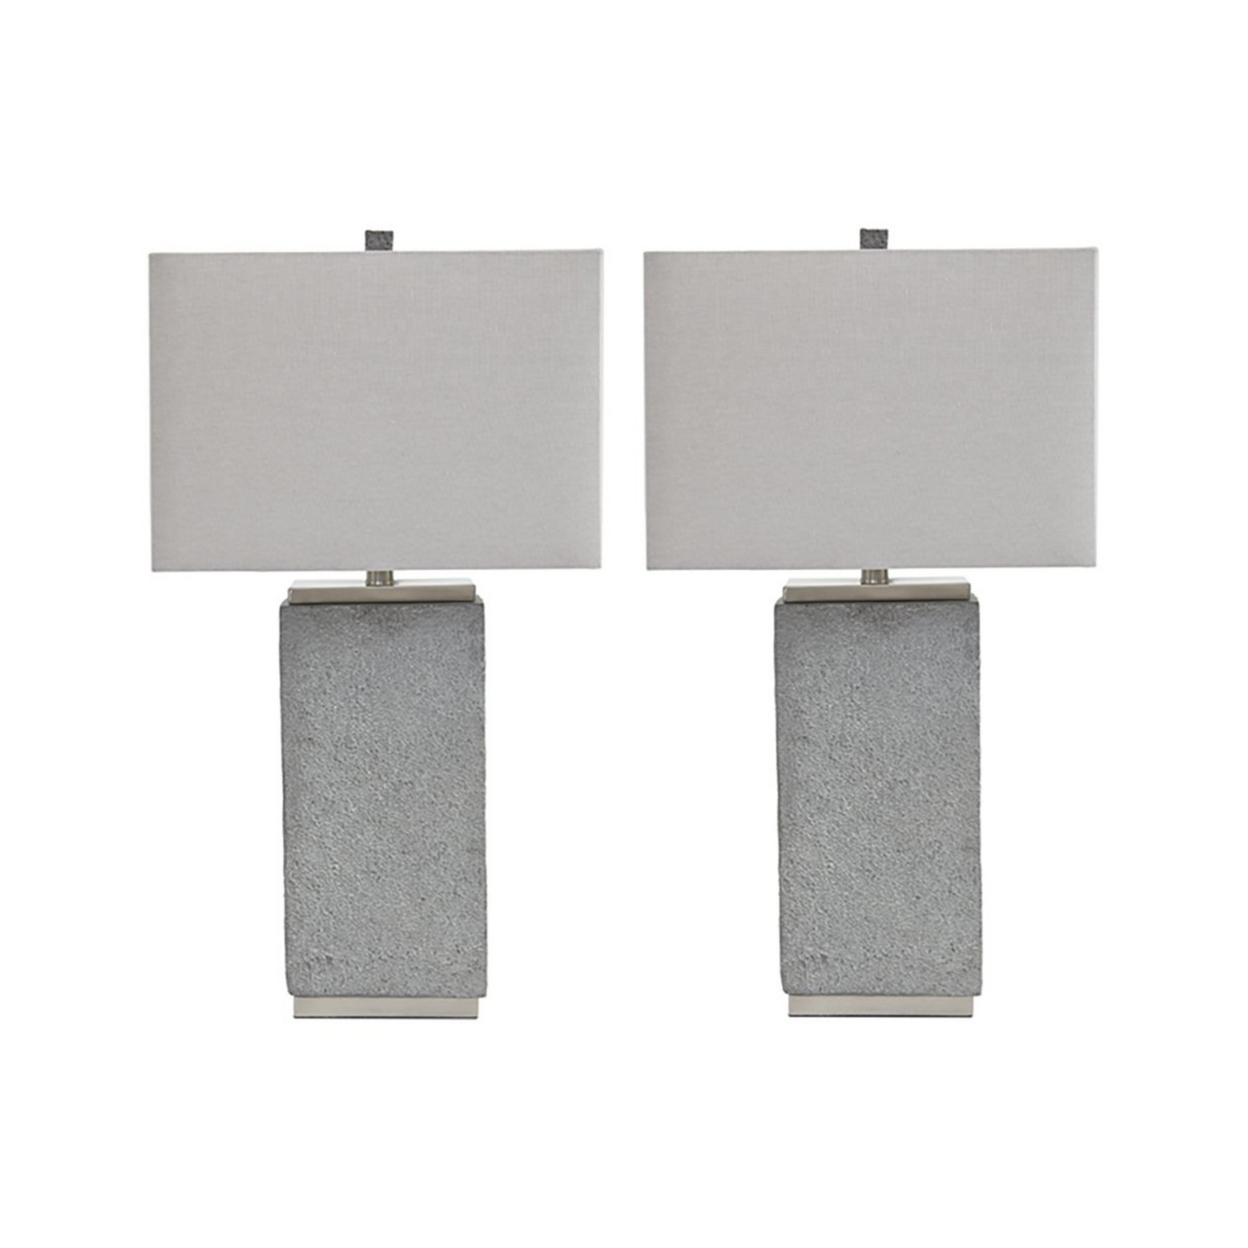 Resin Table Lamp With Faux Concrete Finish And Hardback Shade,Set Of 2,Gray- Saltoro Sherpi